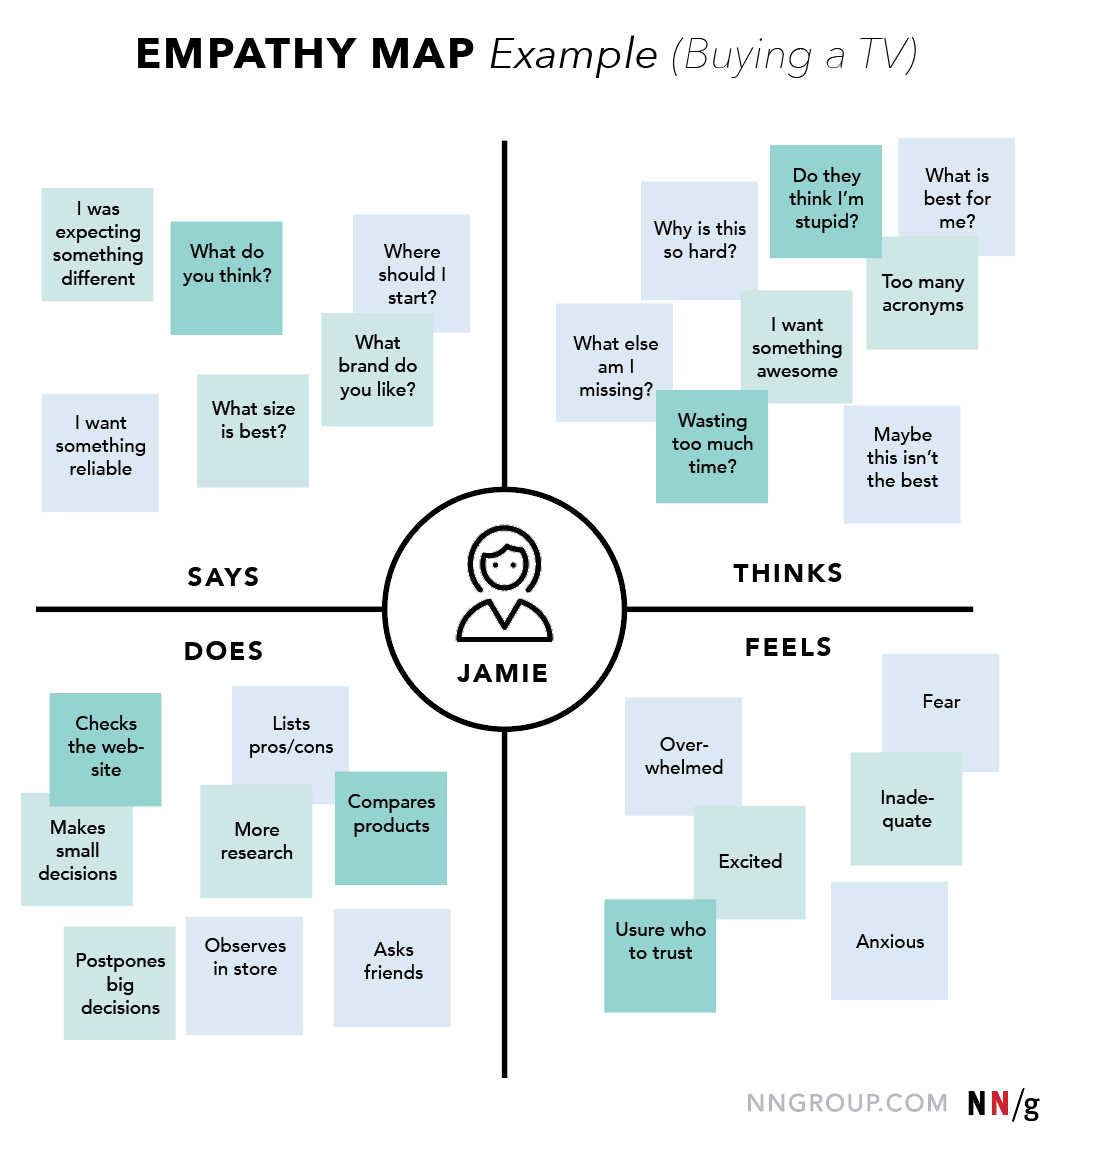 empathy-map-example-1623048159.png